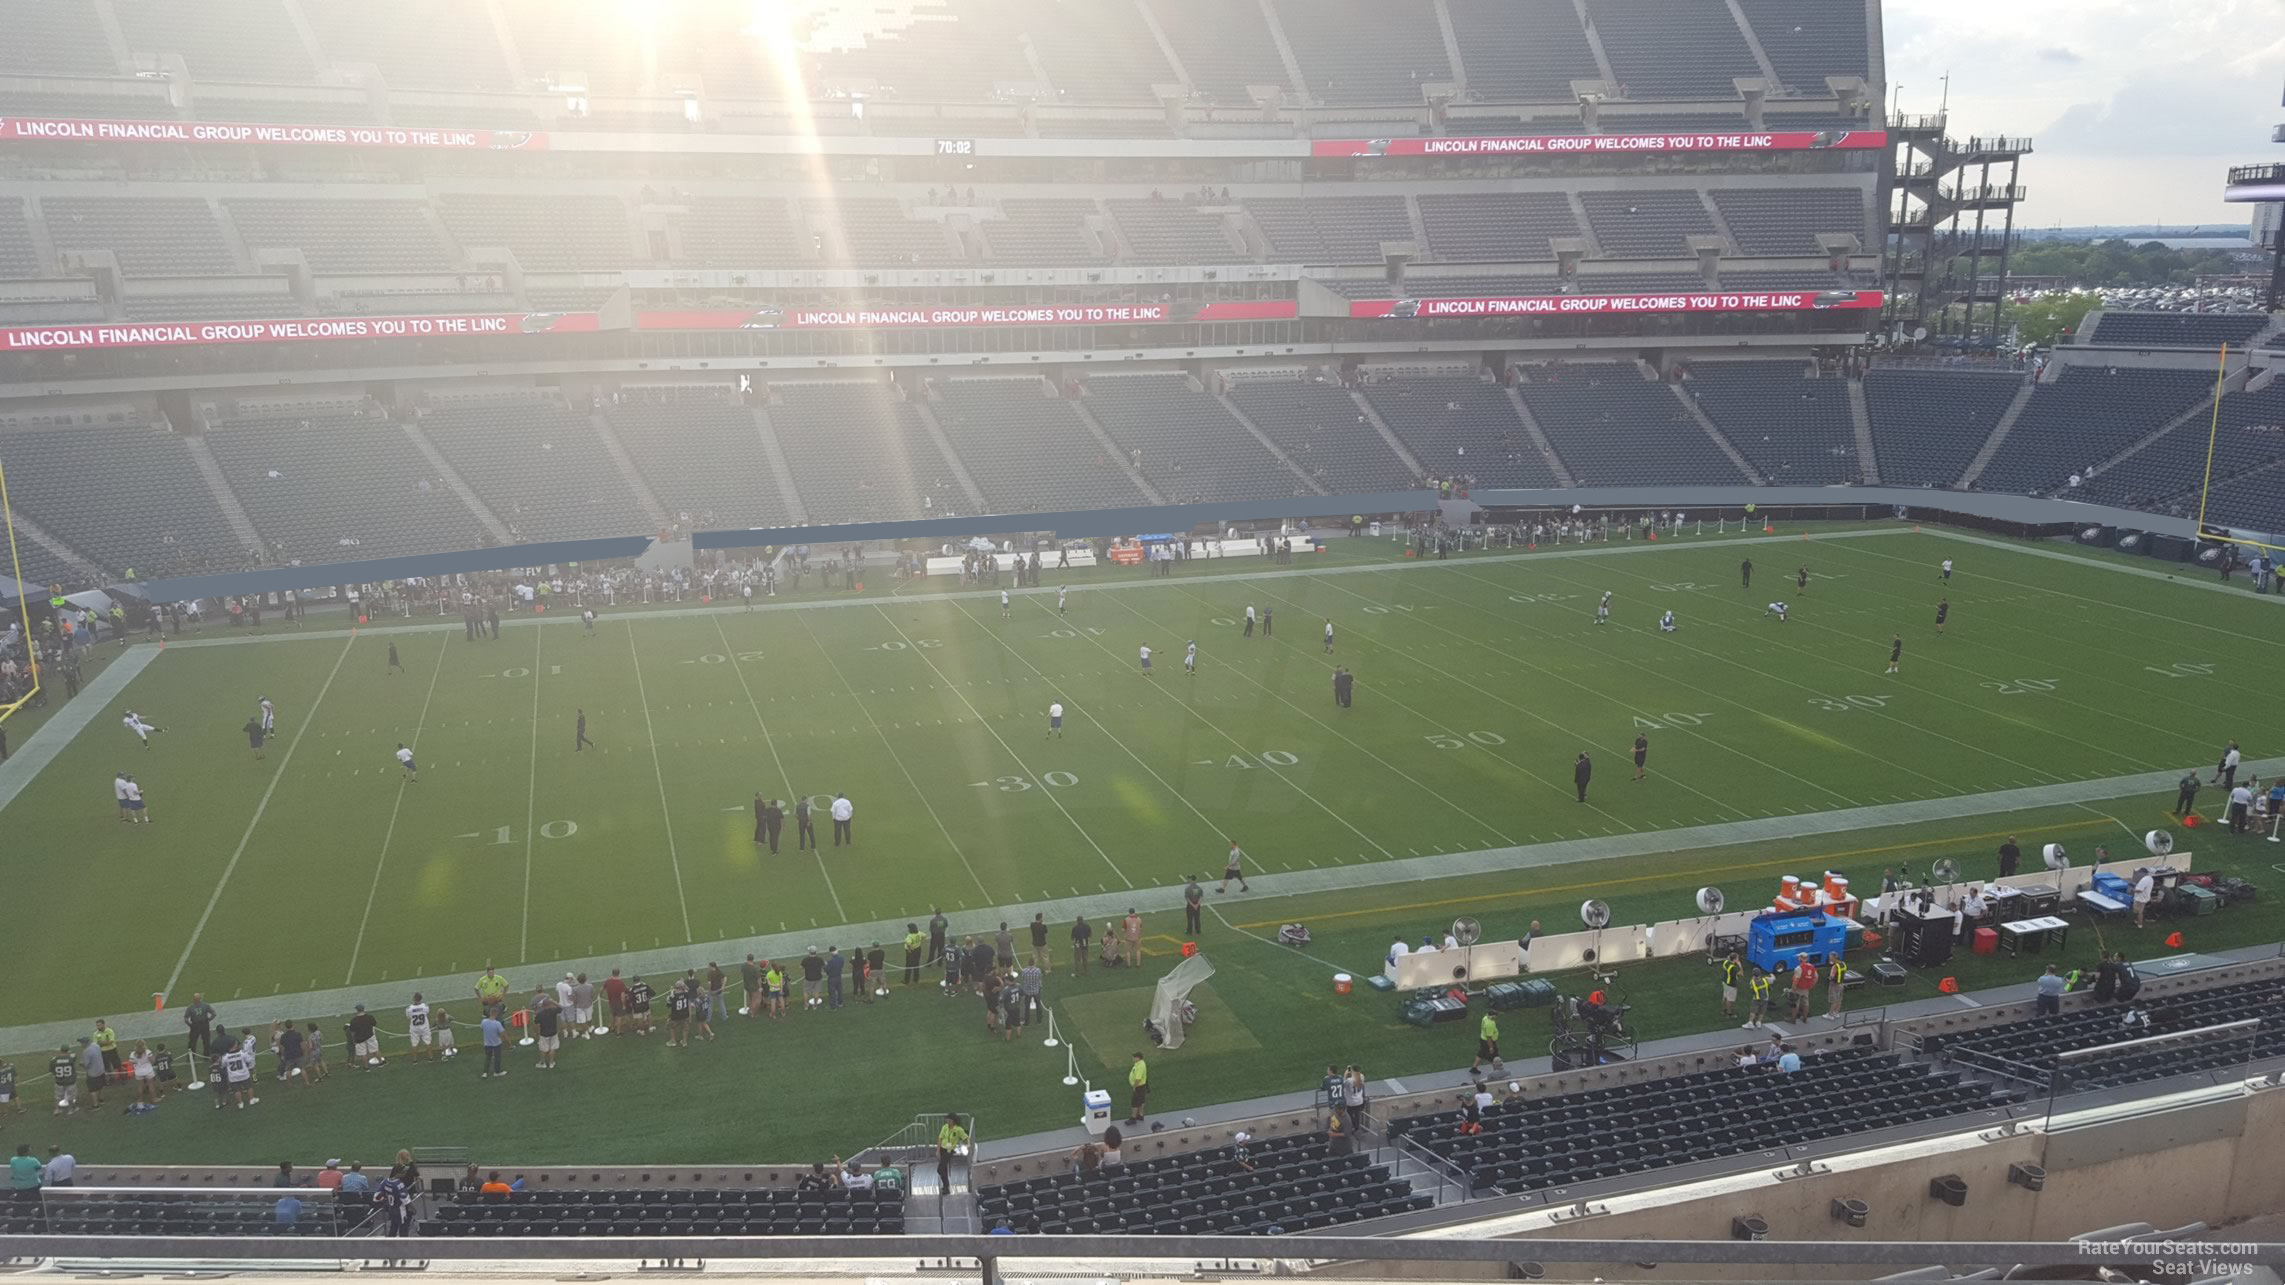 Section C19 at Lincoln Financial Field 